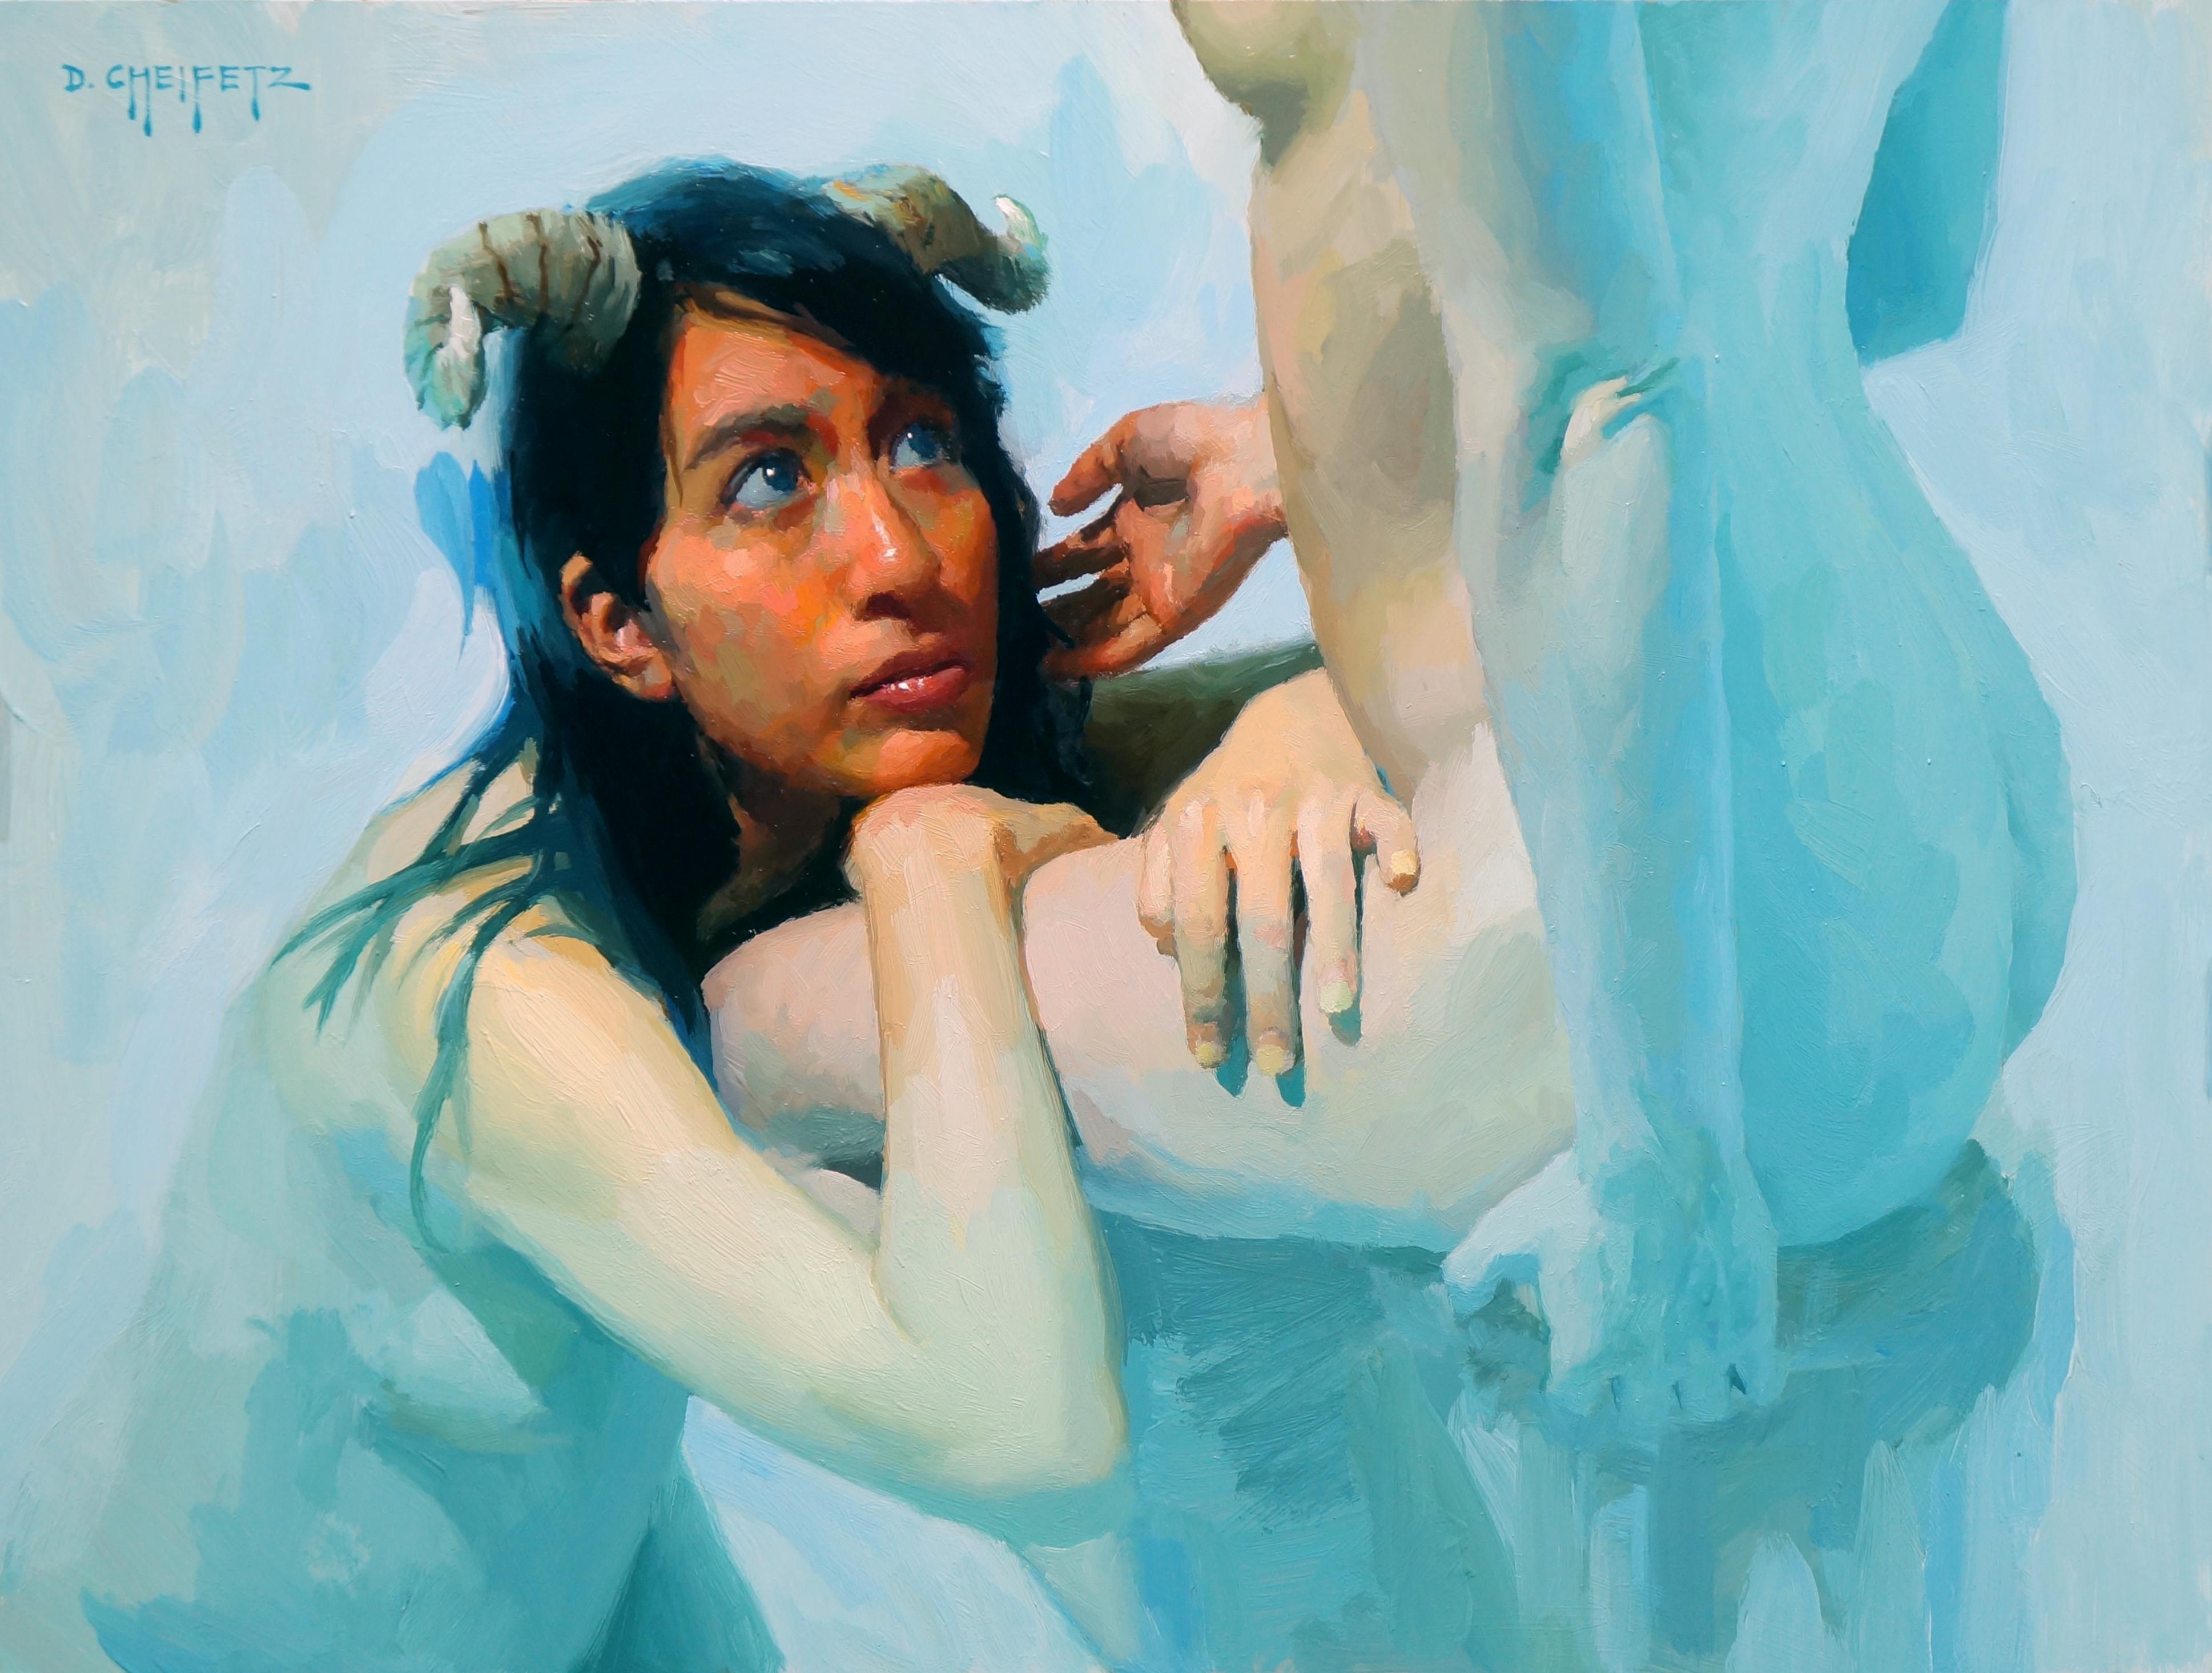 David Cheifetz Nude Painting - "Supplicant, " Oil Painting